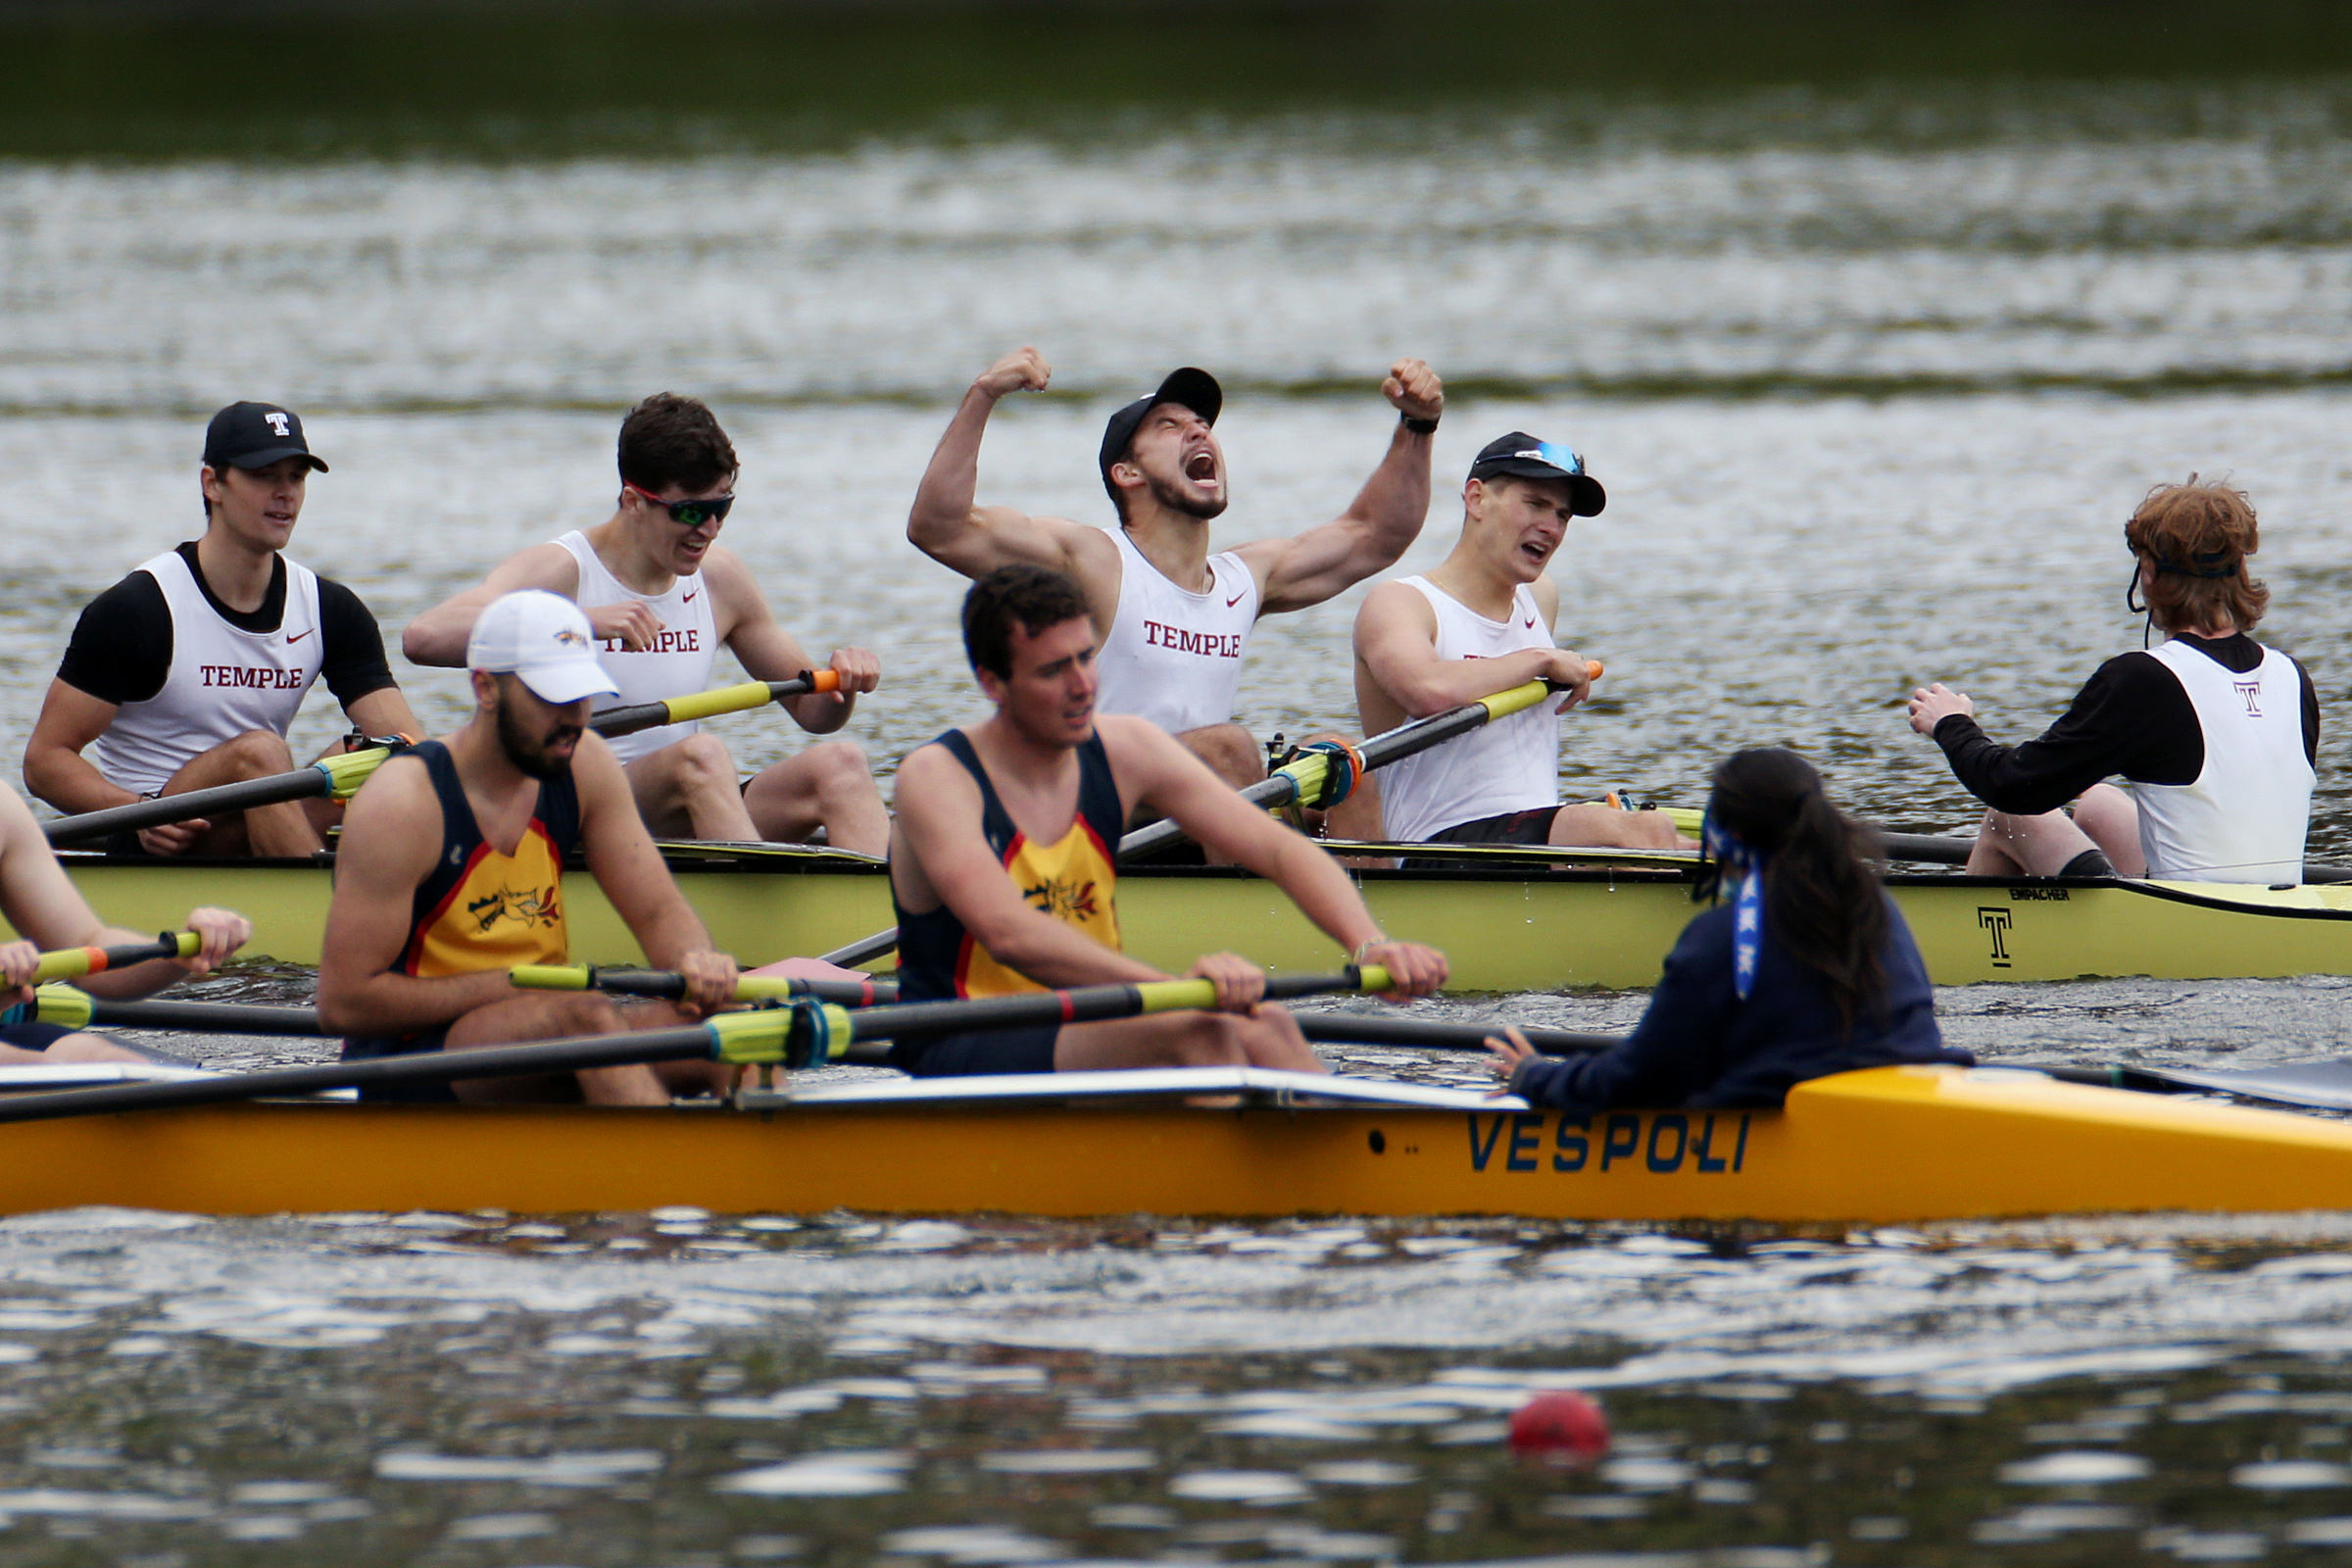 noon Staple amount of sales Temple wins first-ever men's points crown at Jefferson Dad Vail Regatta